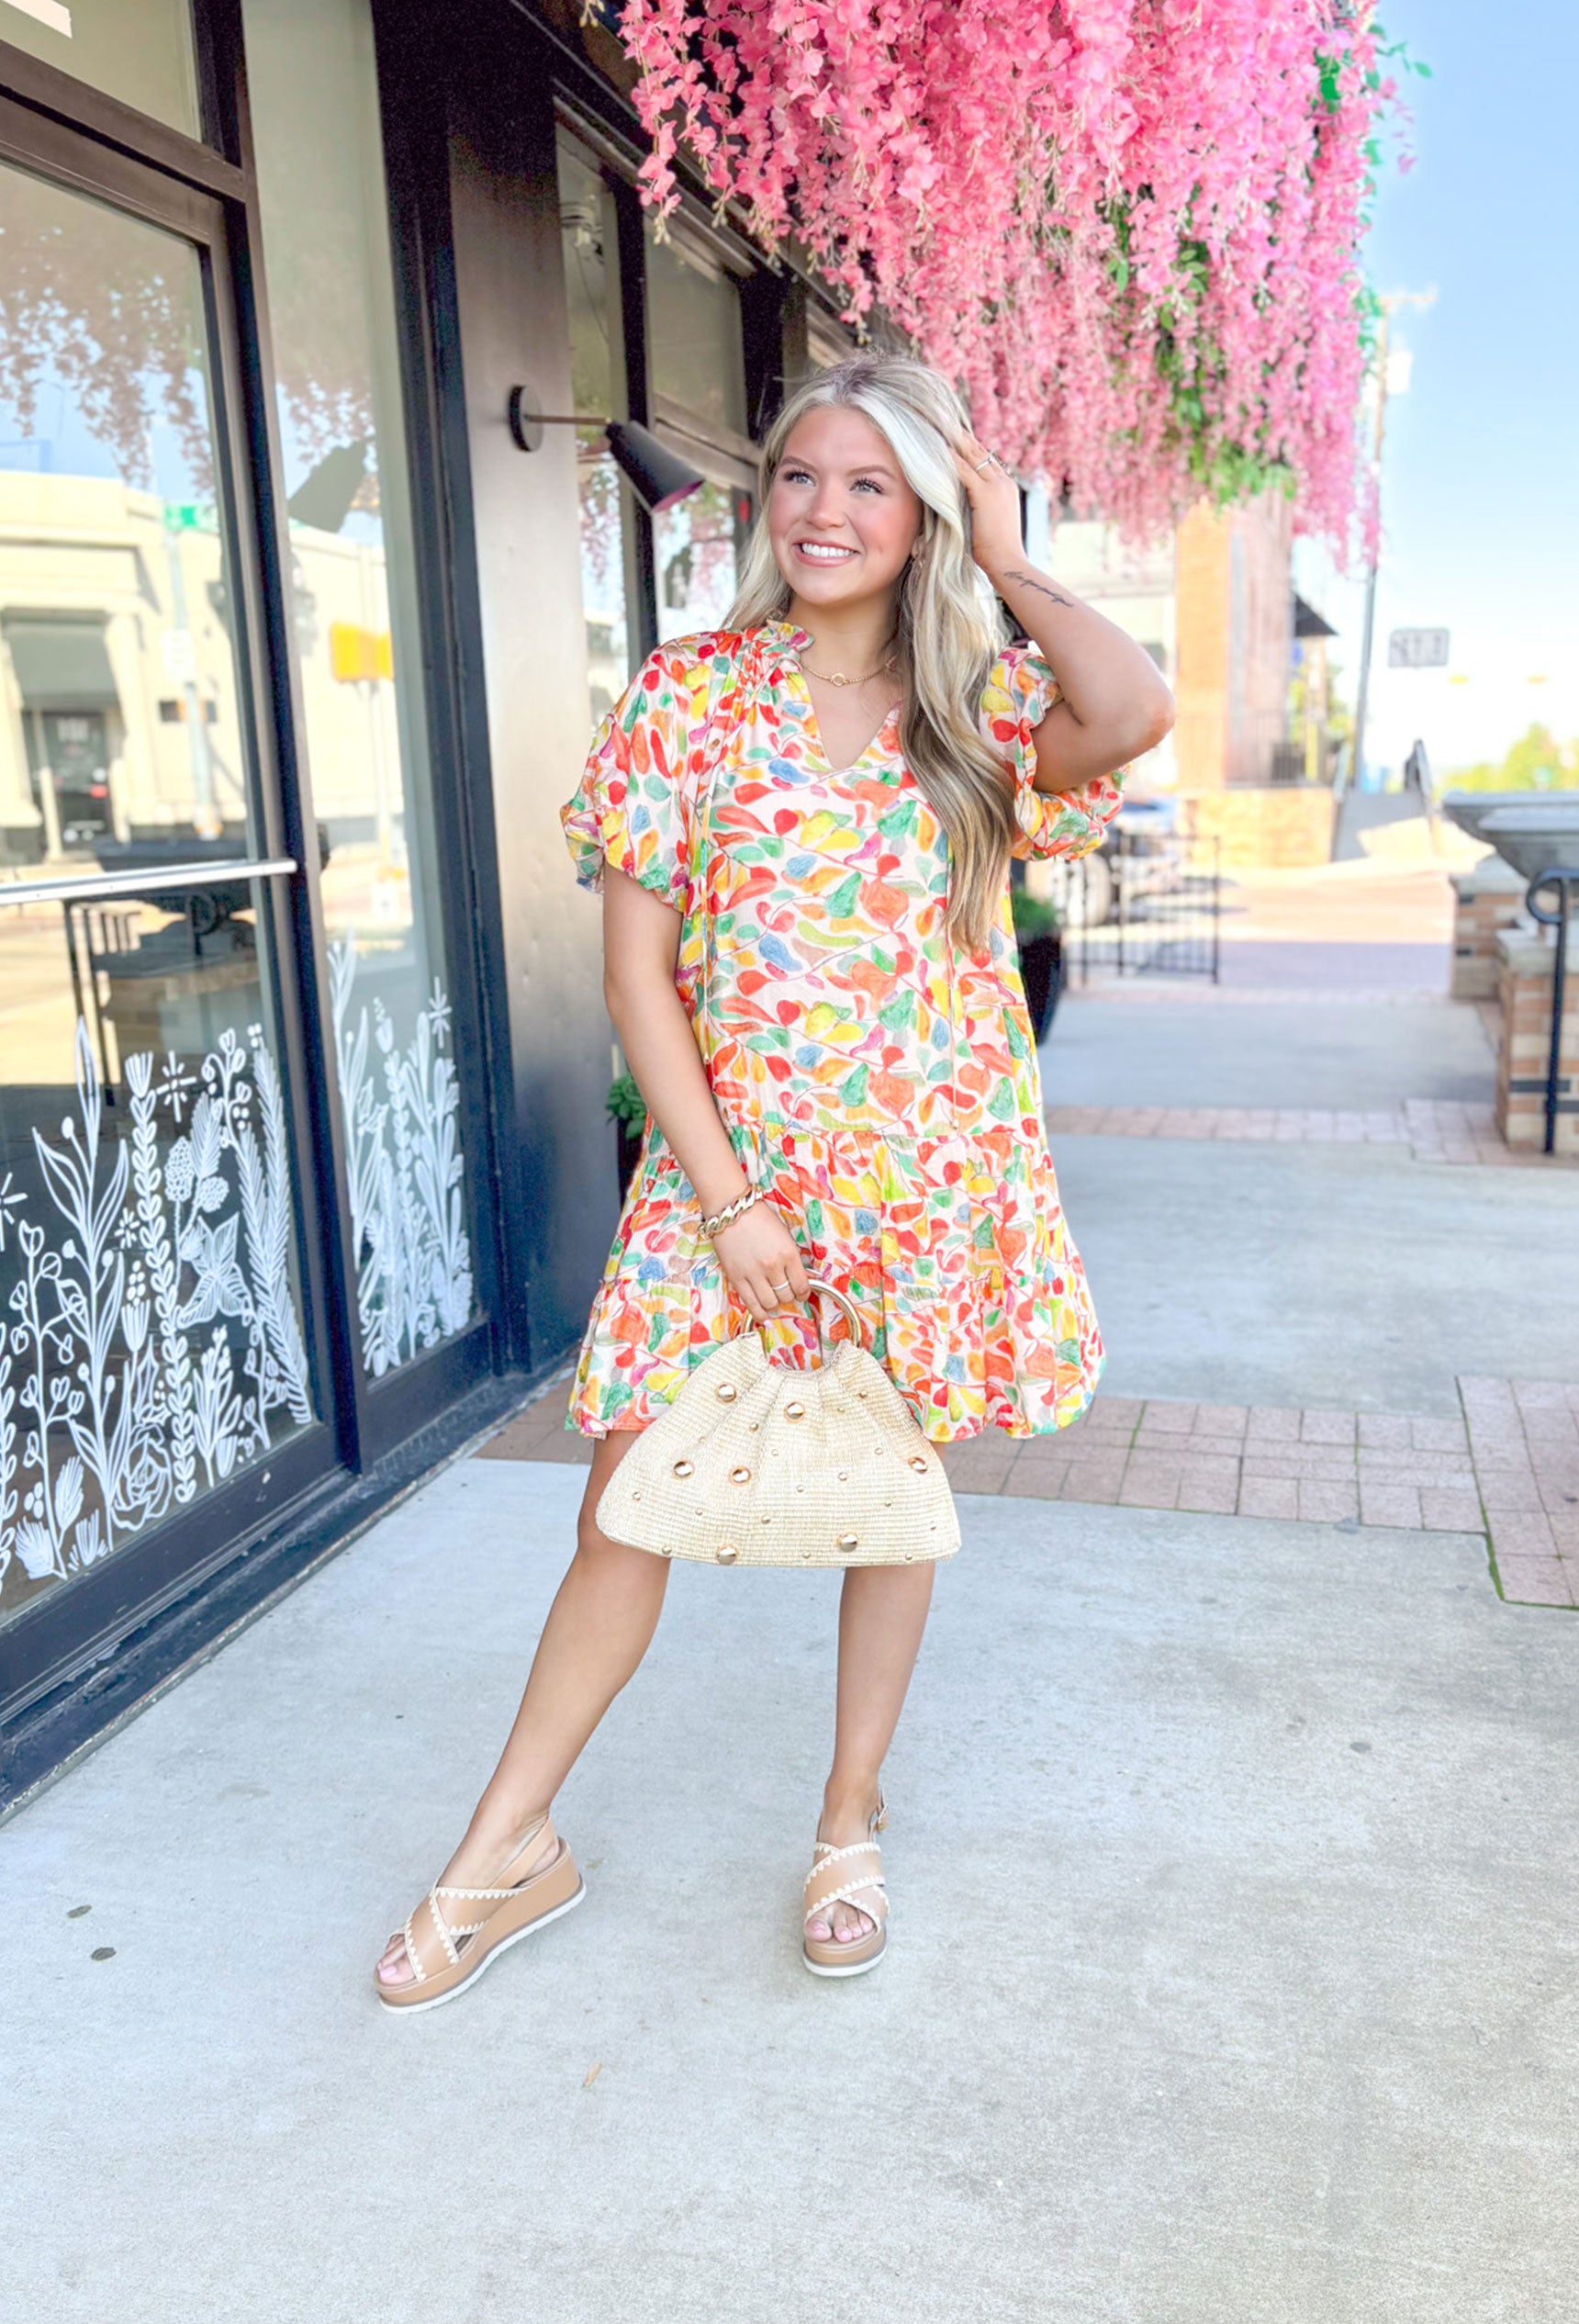 Paradise Awaits Dress, short puff sleeve dress with soft v-neck, ruffling around the neck, string details on the neck, abstract print in the colors cream, orange, yellow, red, and green